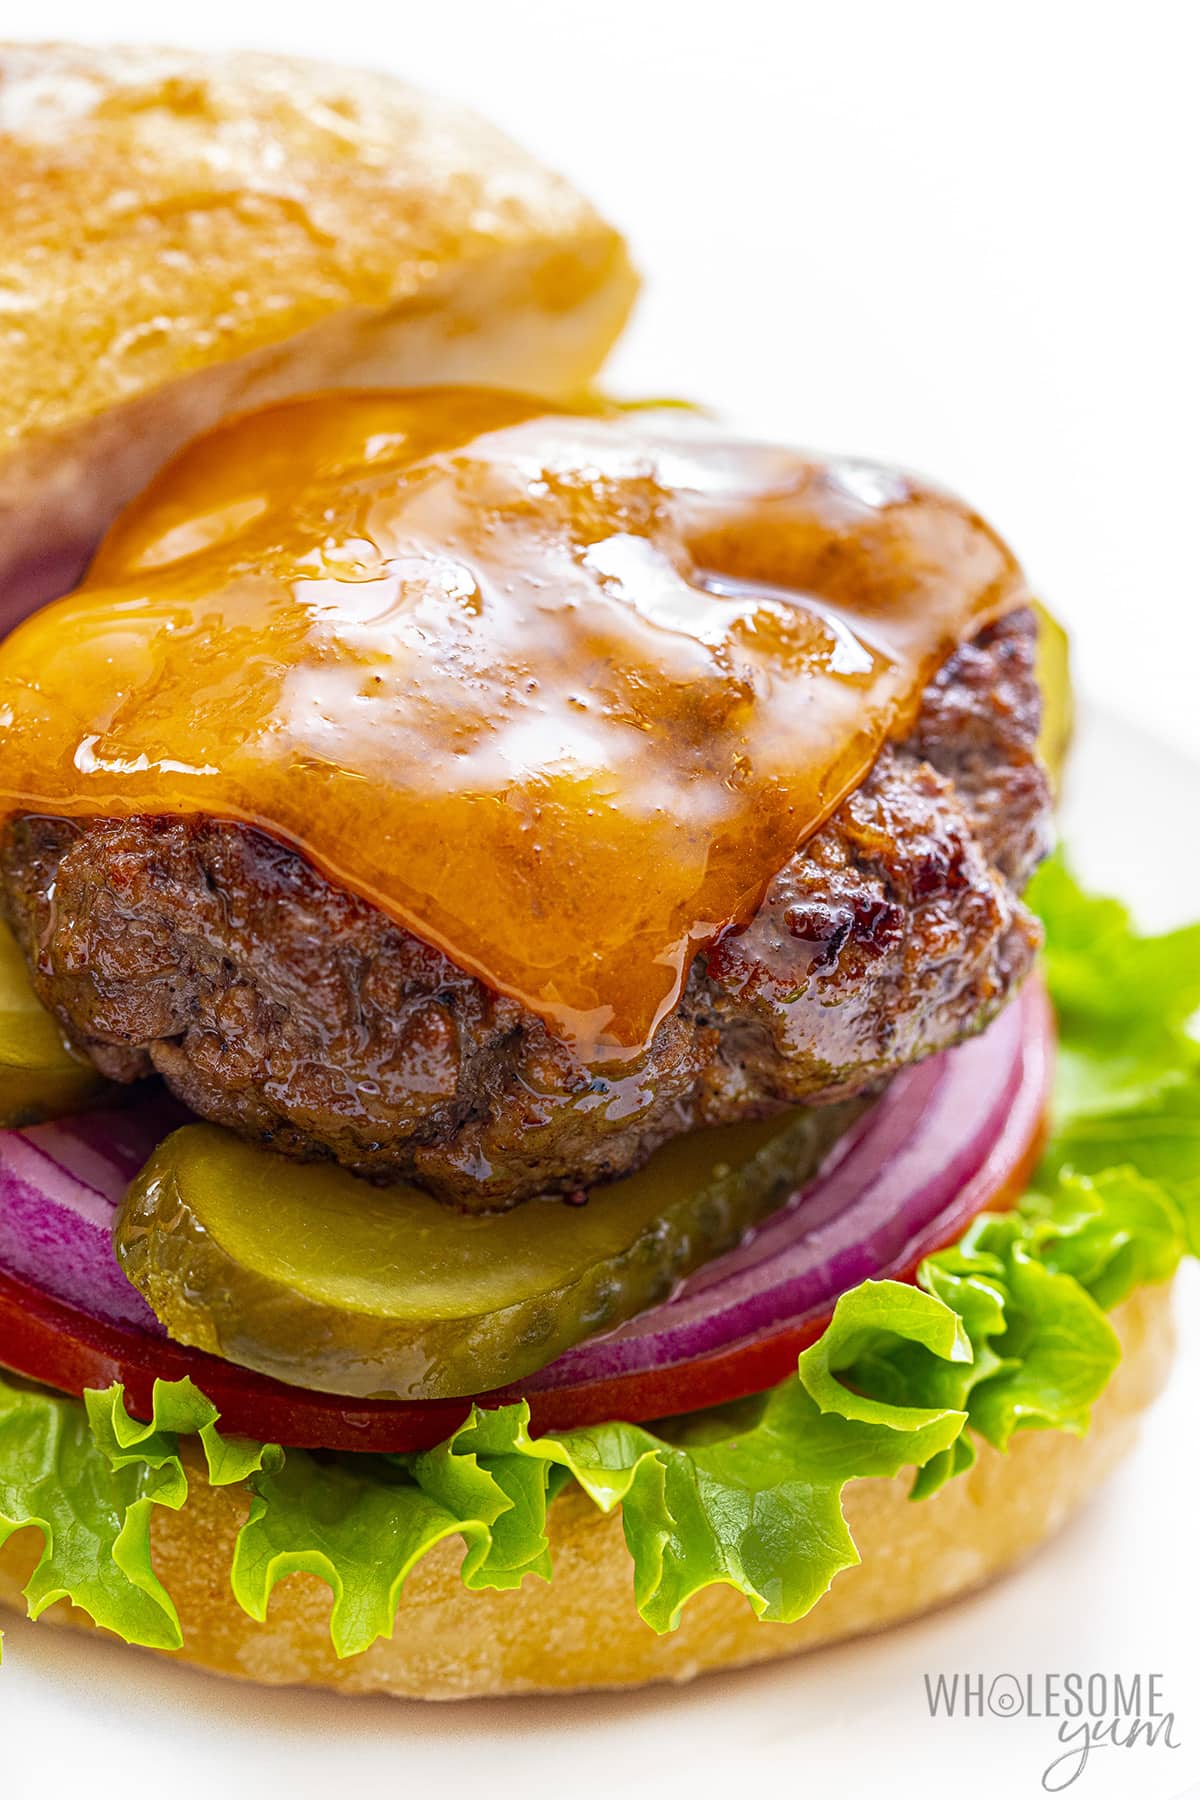 Juicy burger with cheese and fixings on a bun.